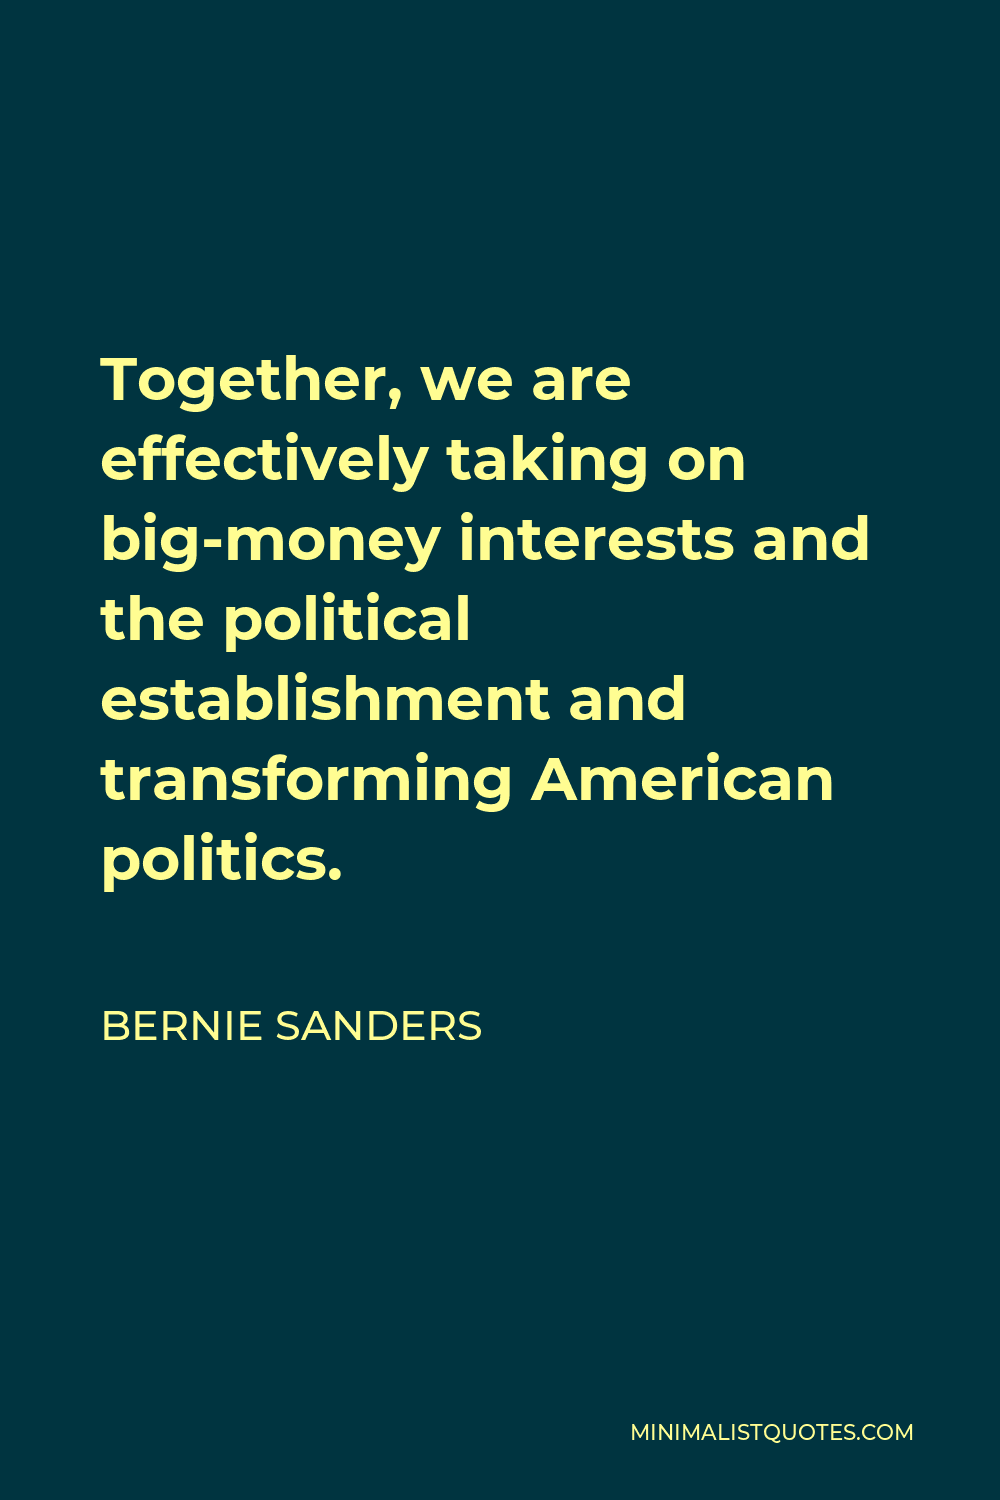 Bernie Sanders Quote - Together, we are effectively taking on big-money interests and the political establishment and transforming American politics.